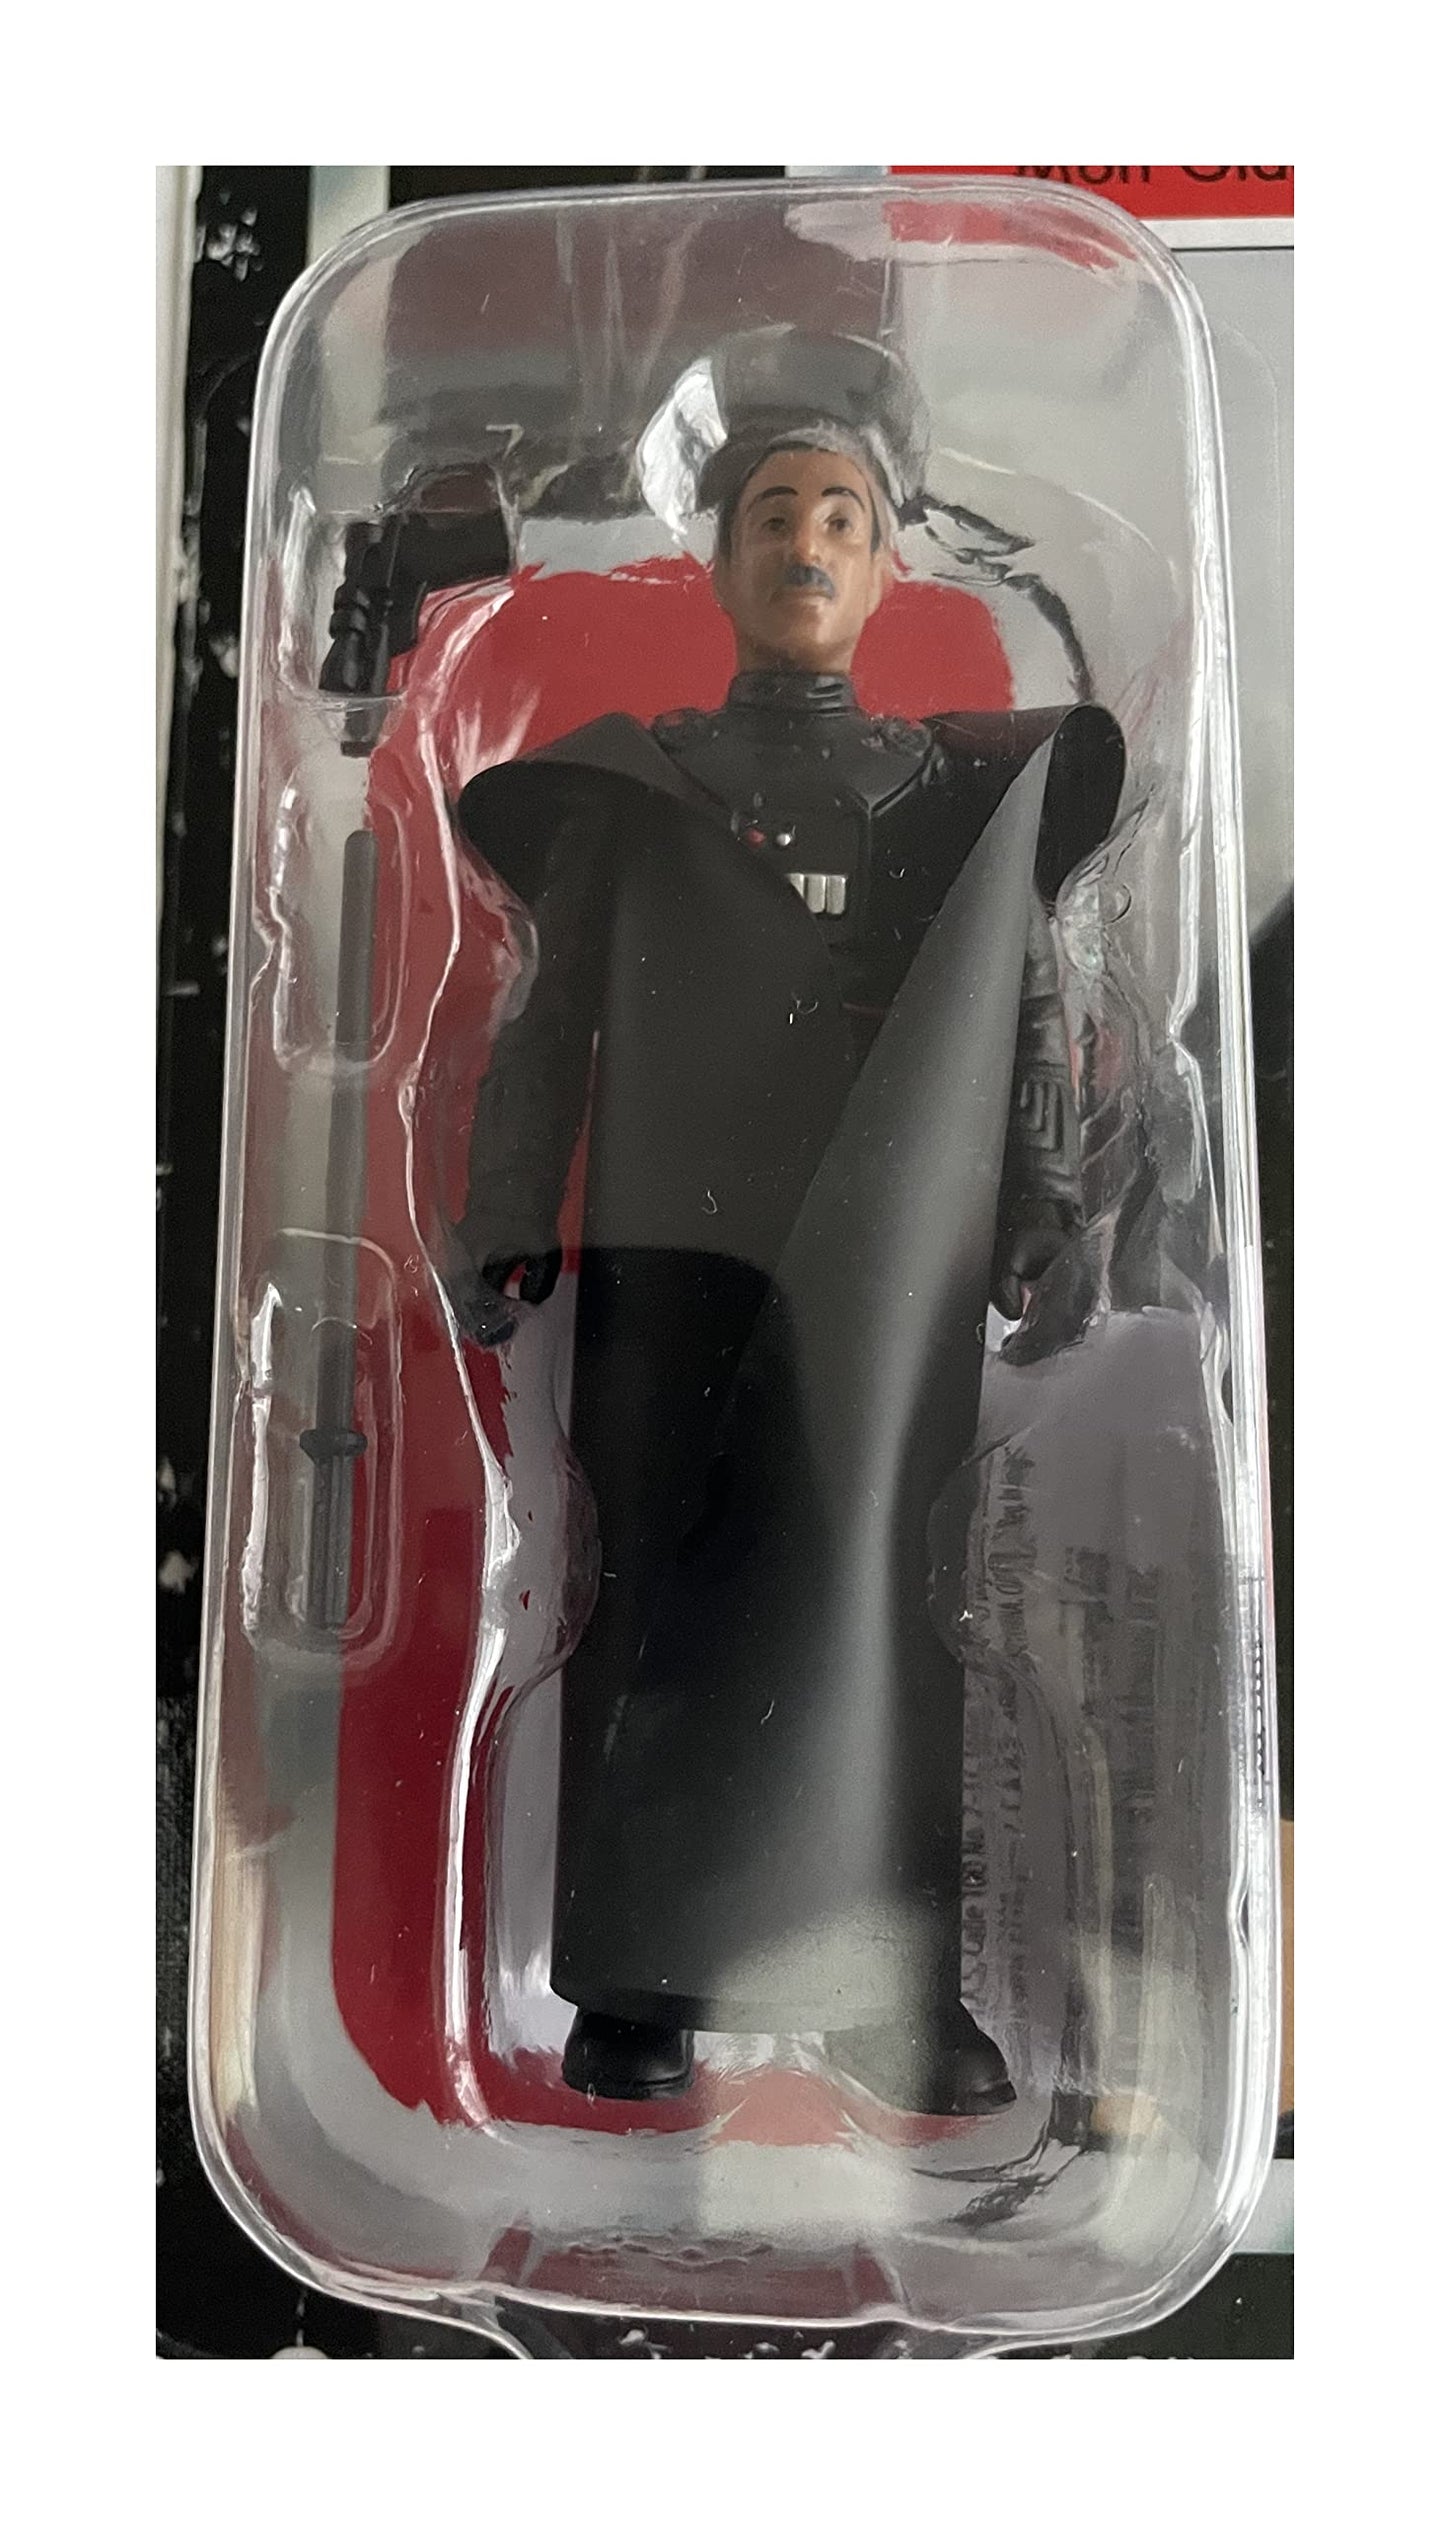 Star Wars Retro Collection - The Mandalorian - Moff Gideon Action Figure With Lightsaber Sword - Brand New Factory Sealed